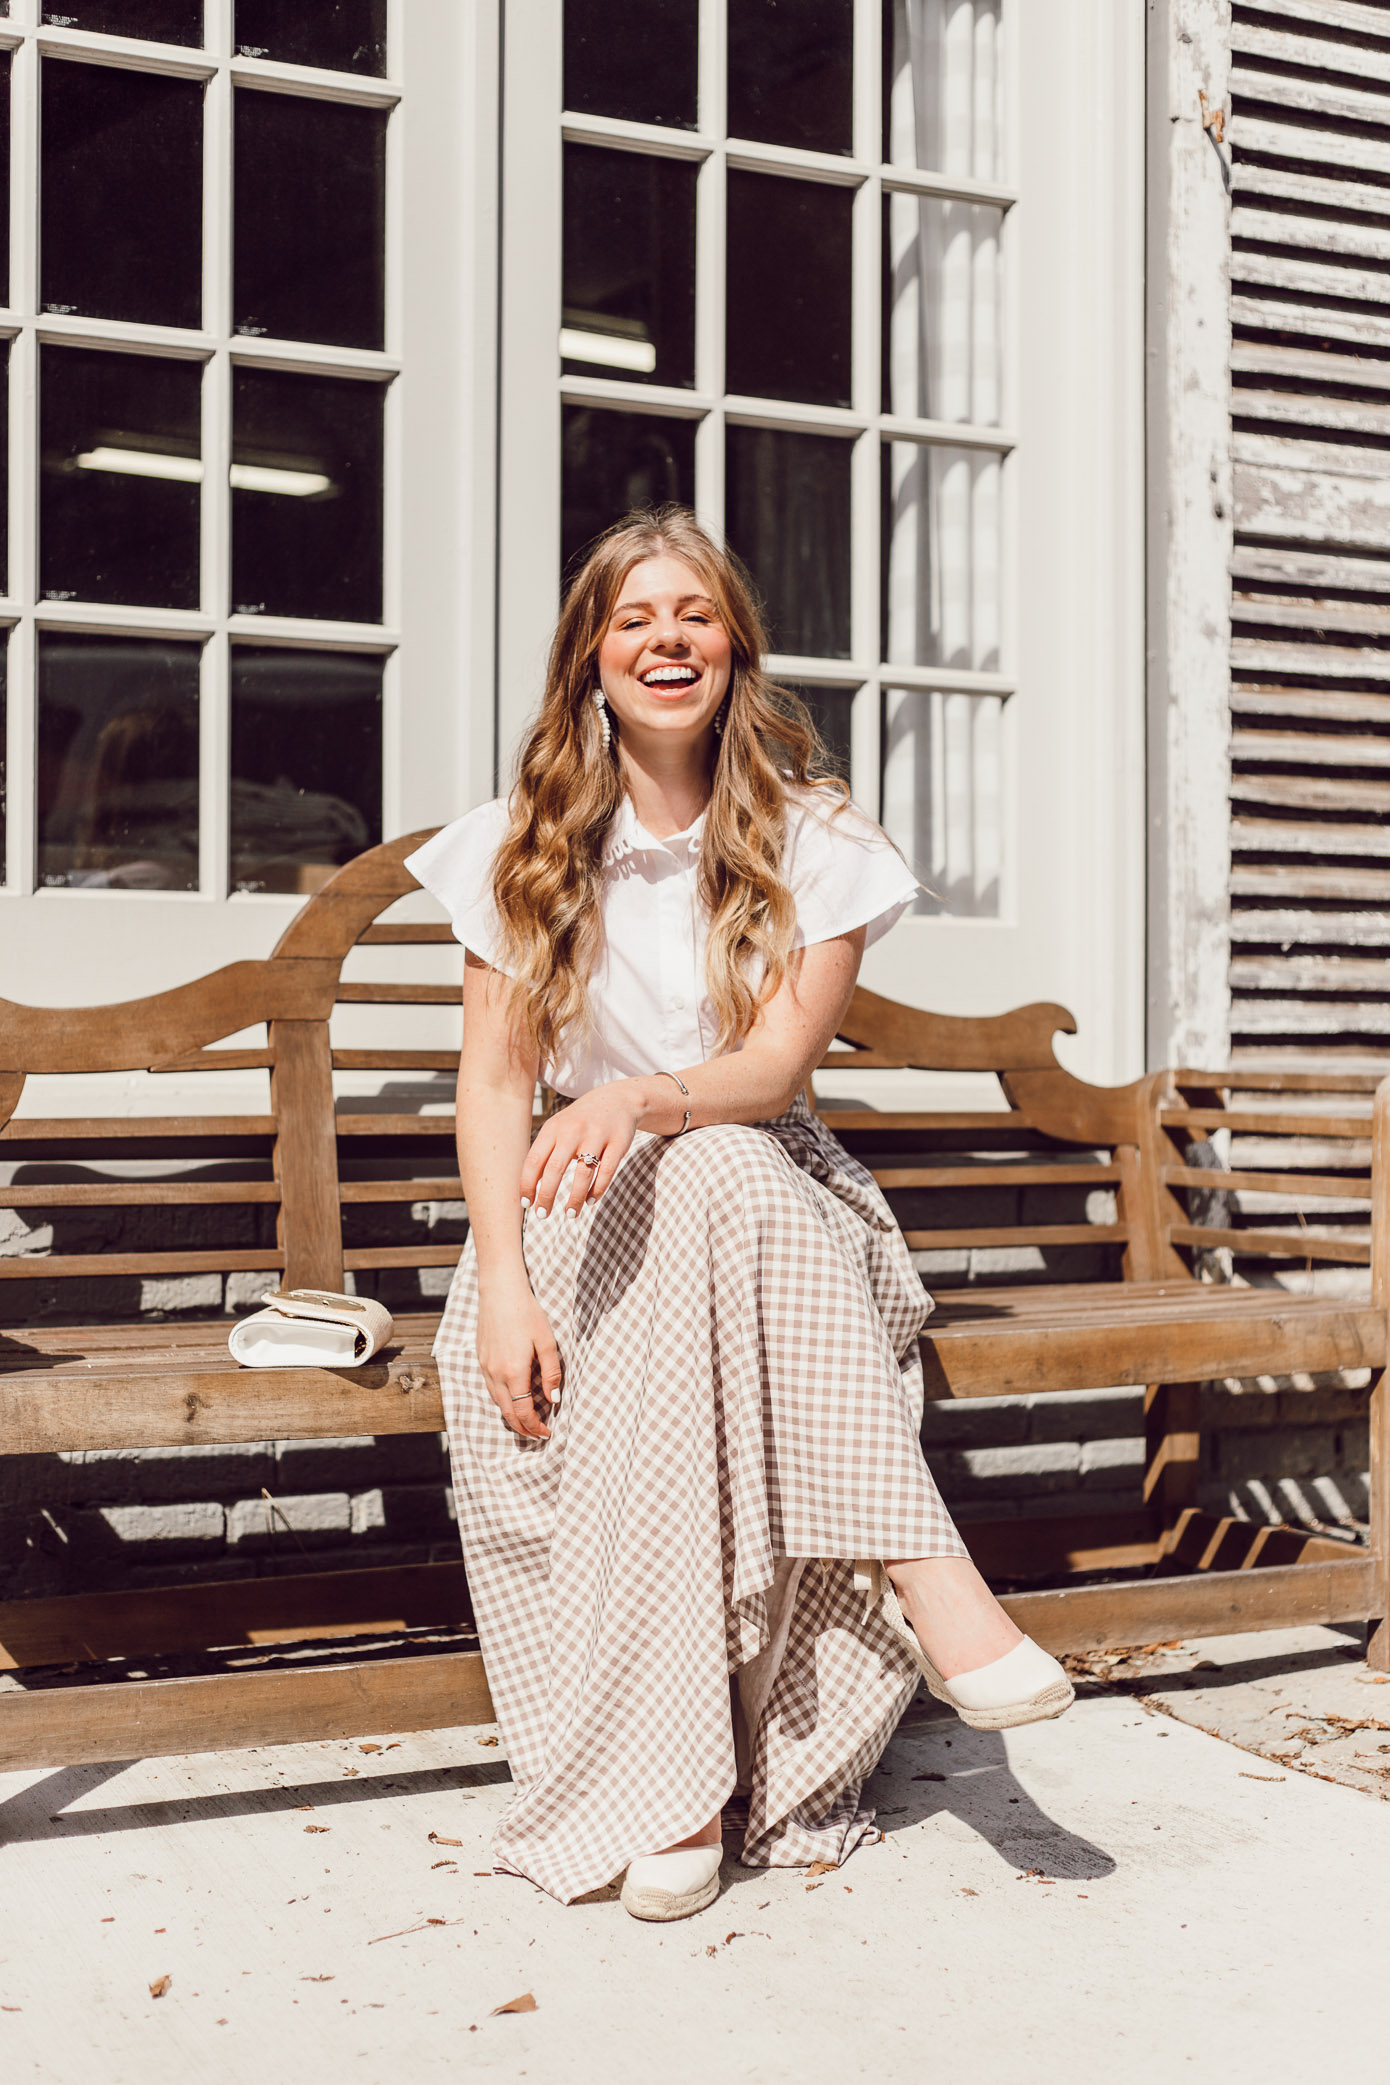 Feminine White Button Down Blouse - A Summer Gingham Maxi Skirt styled by Laura Leigh of Louella Reese #maxiskirt #gingham #southernstyle